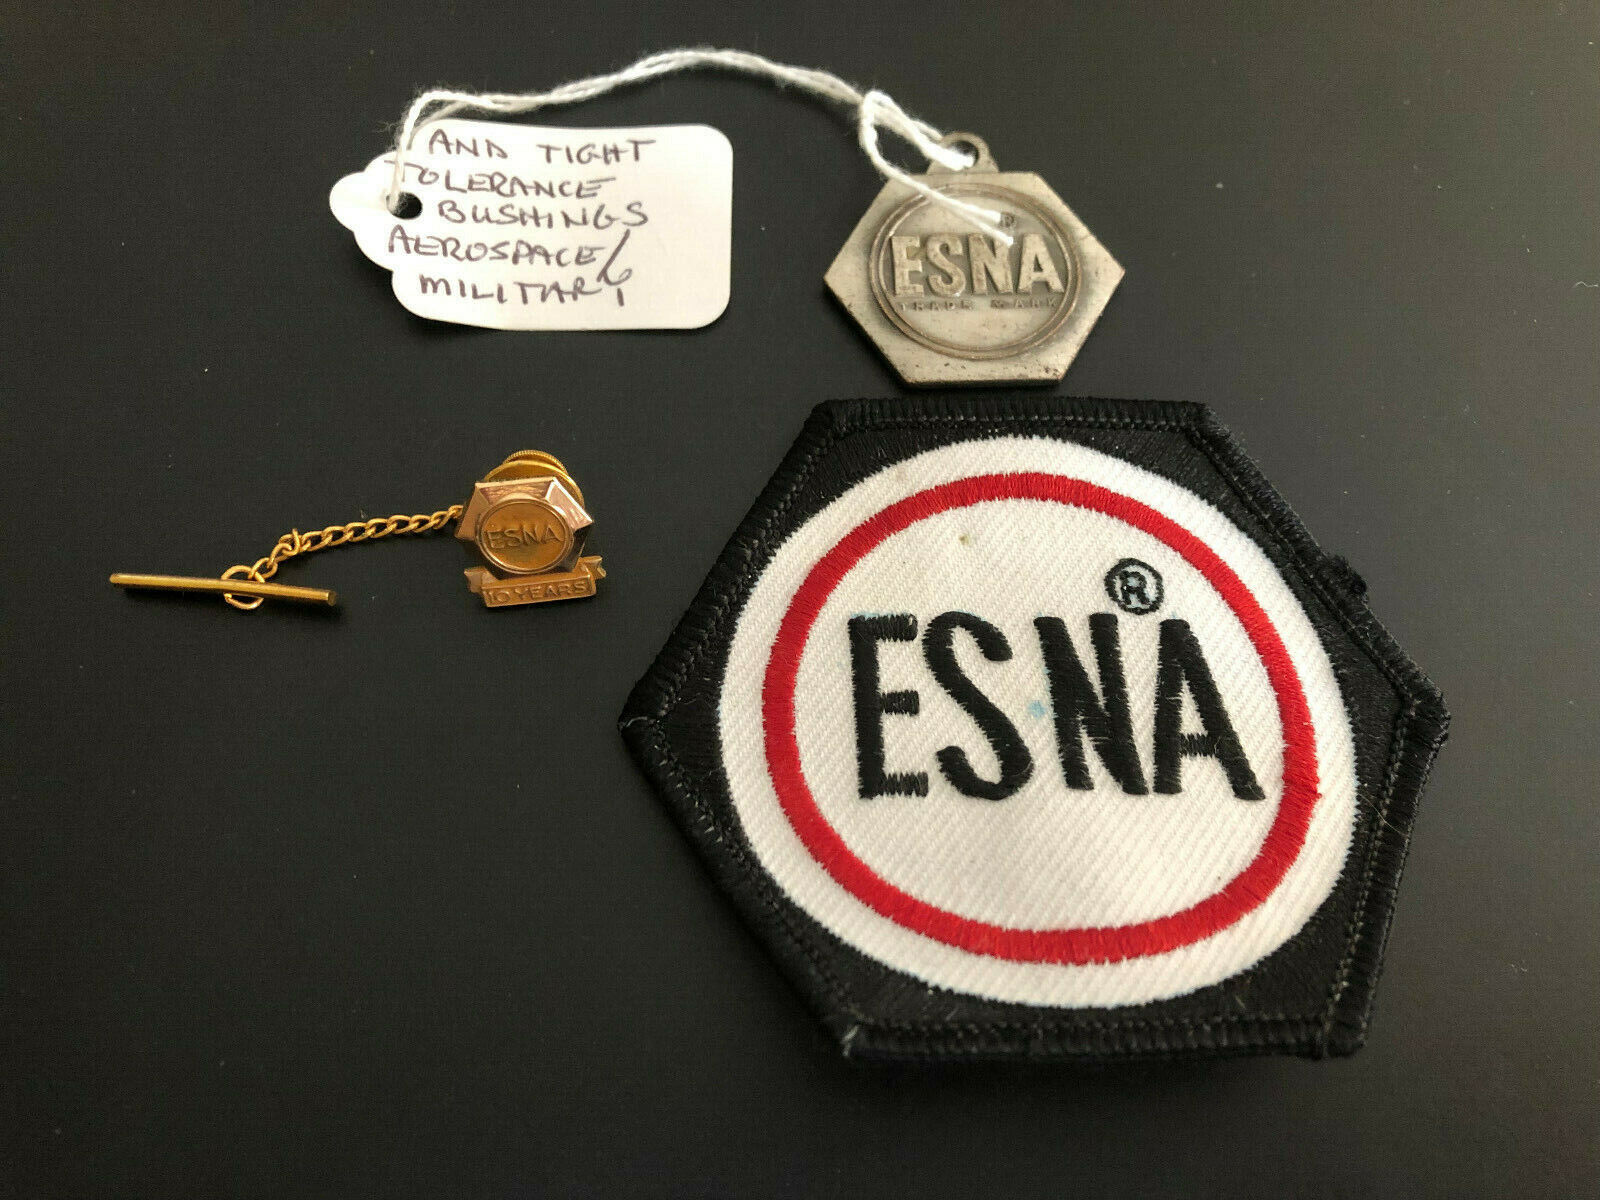 Vintage ESNA Advertising Fob Medal Pin Patch - Aerospace & Military Products